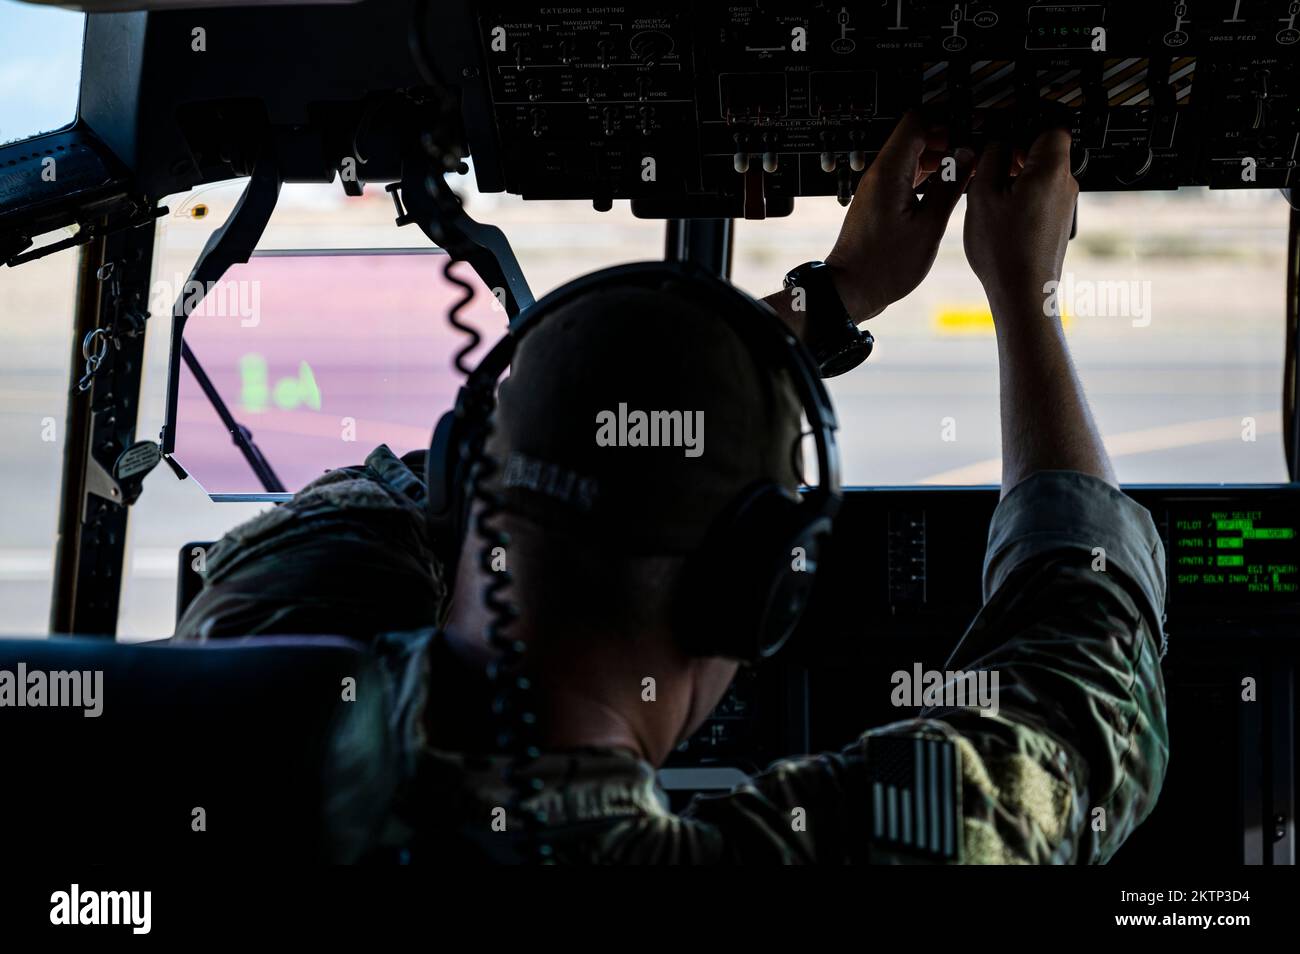 A U.S. Air Force HC-130J Combat King II pilot, assigned to the 81st Expeditionary Rescue Squadron (ERQS) conducts preflight checks aboard an HC-130J on Camp Lemonnier, Djibouti, Oct. 16, 2022. The 81st ERQS is a rapidly deployable combat search and rescue force that can conduct tactical air refueling, airdrop and airland of personnel and/or equipment during day or night operations in support of combat personnel recovery within Combined Joint Task Force – Horn of Africa area of responsibility. (U.S. Air Force photo by Staff Sgt. Devin M. Rumbaugh) Stock Photo